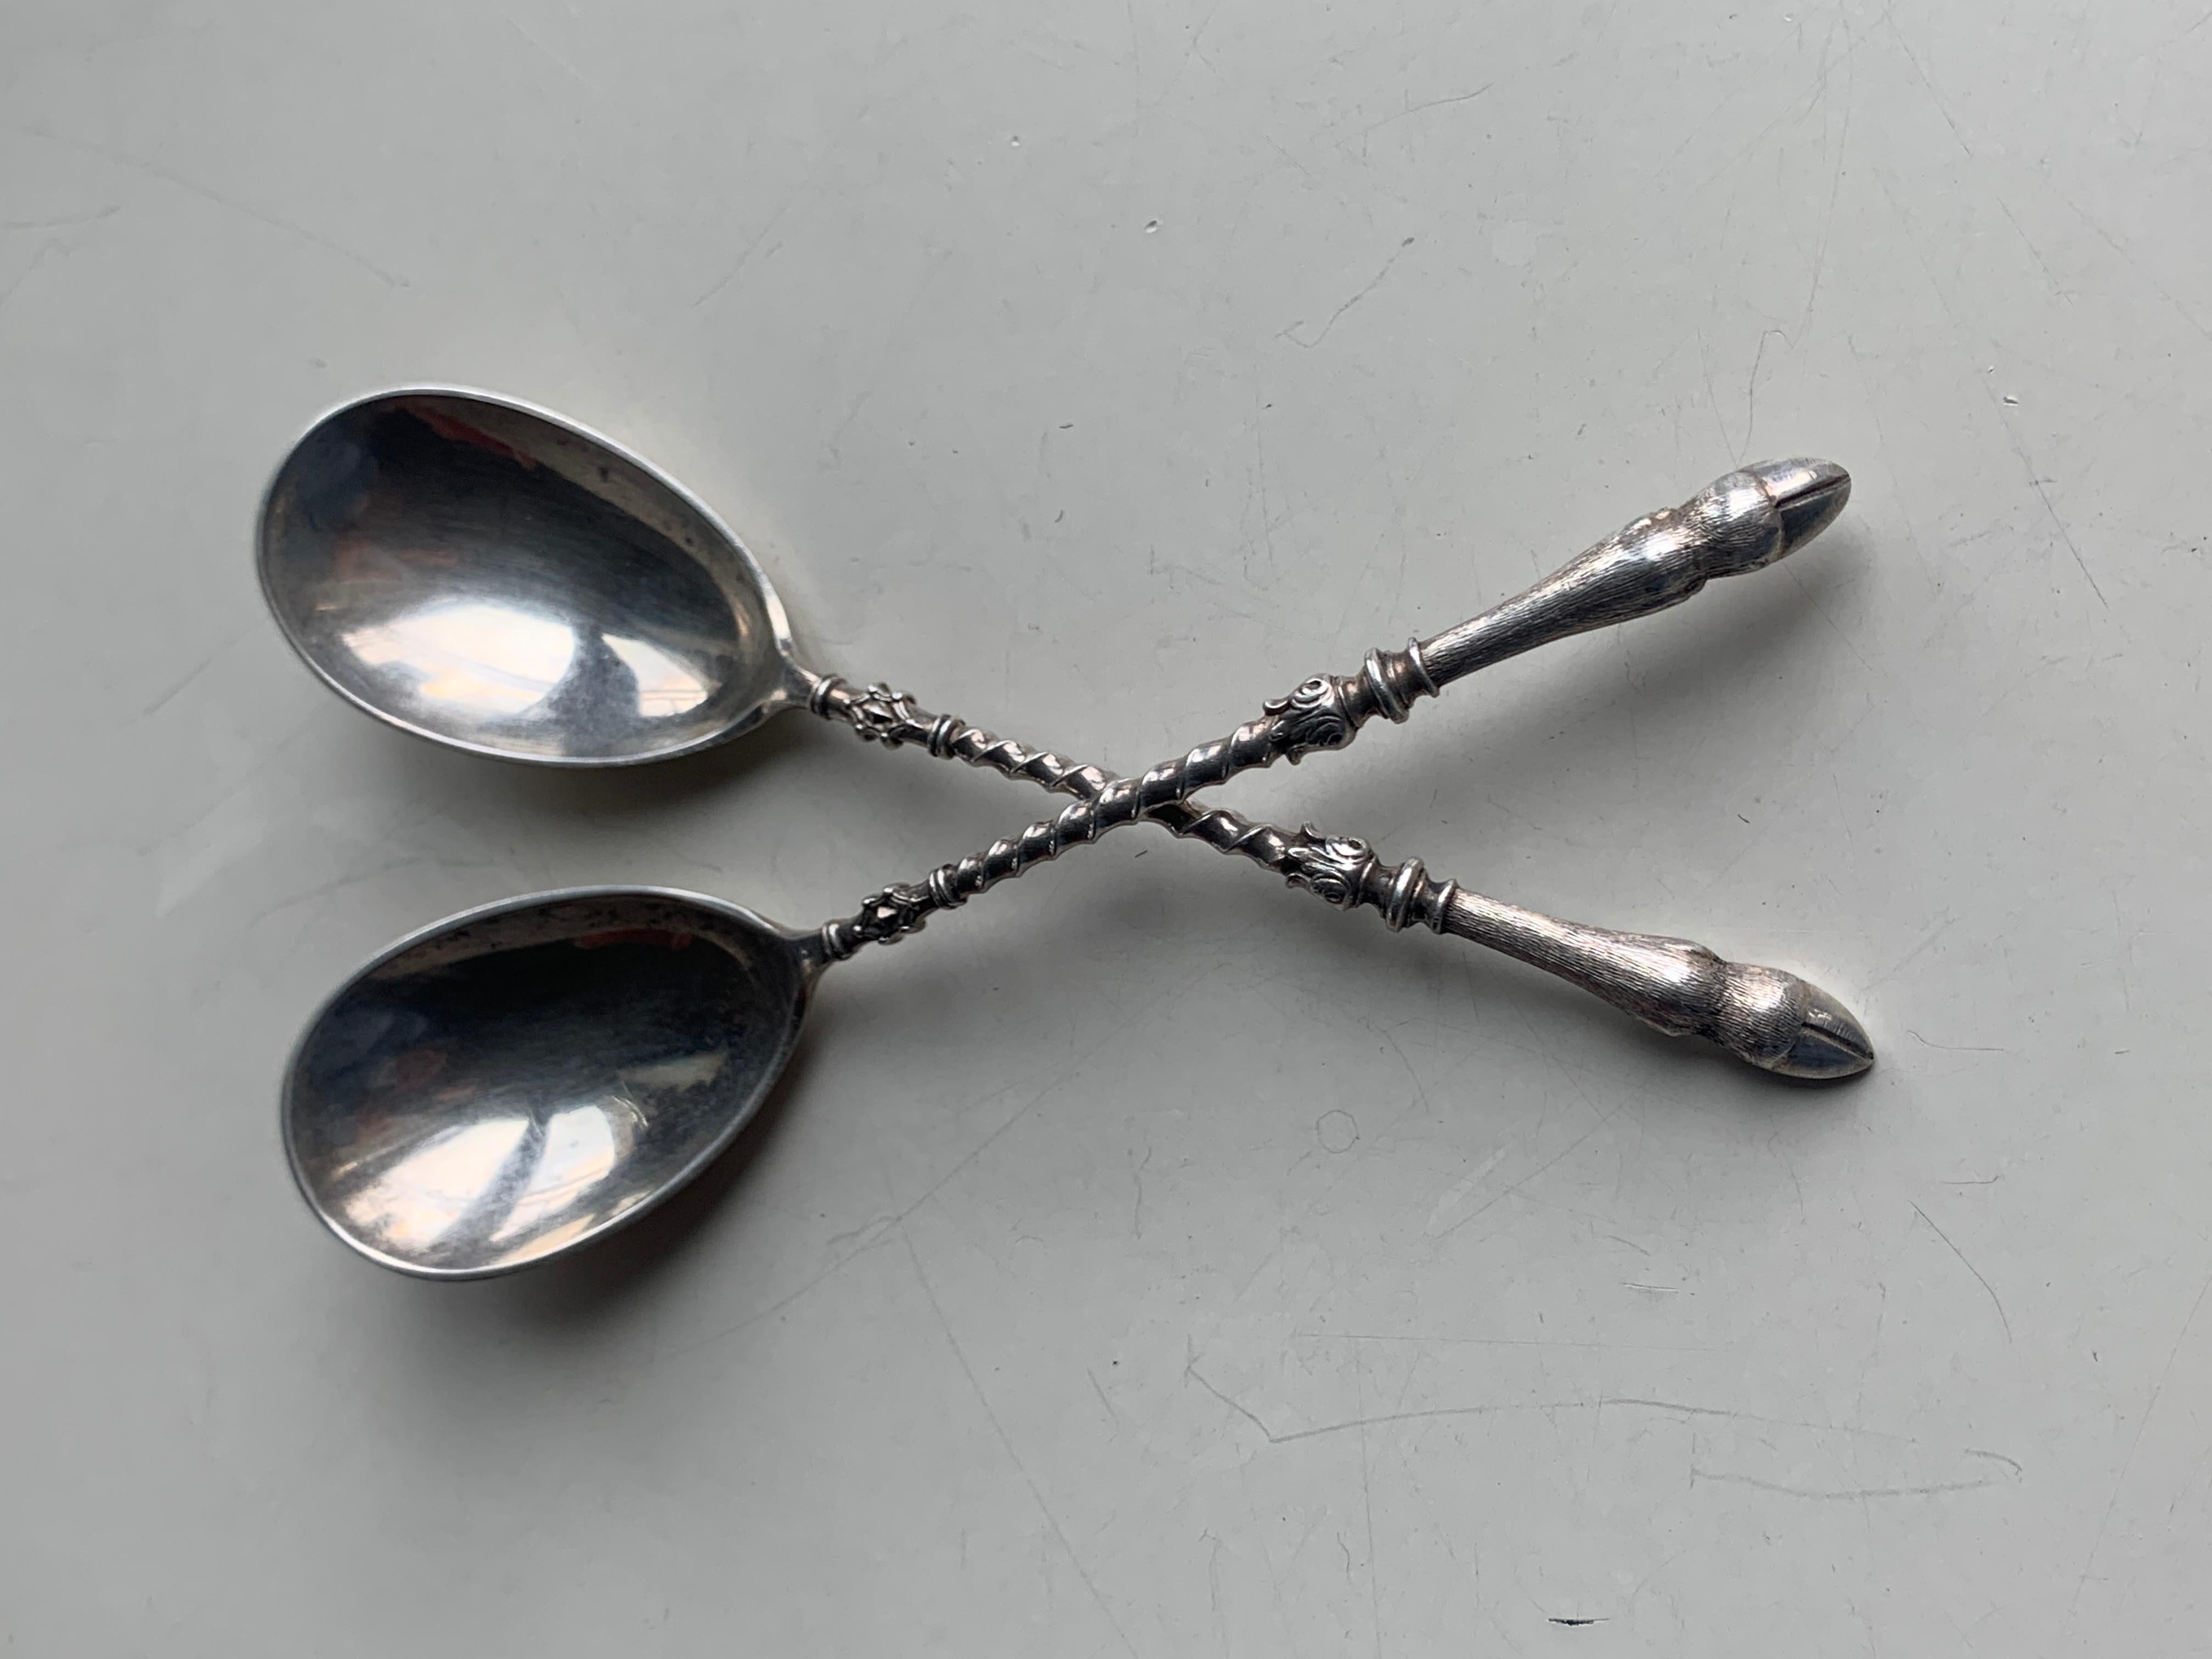 19th century French silver set of teaspoons with goat hooves as handles.
France, circa 1880.